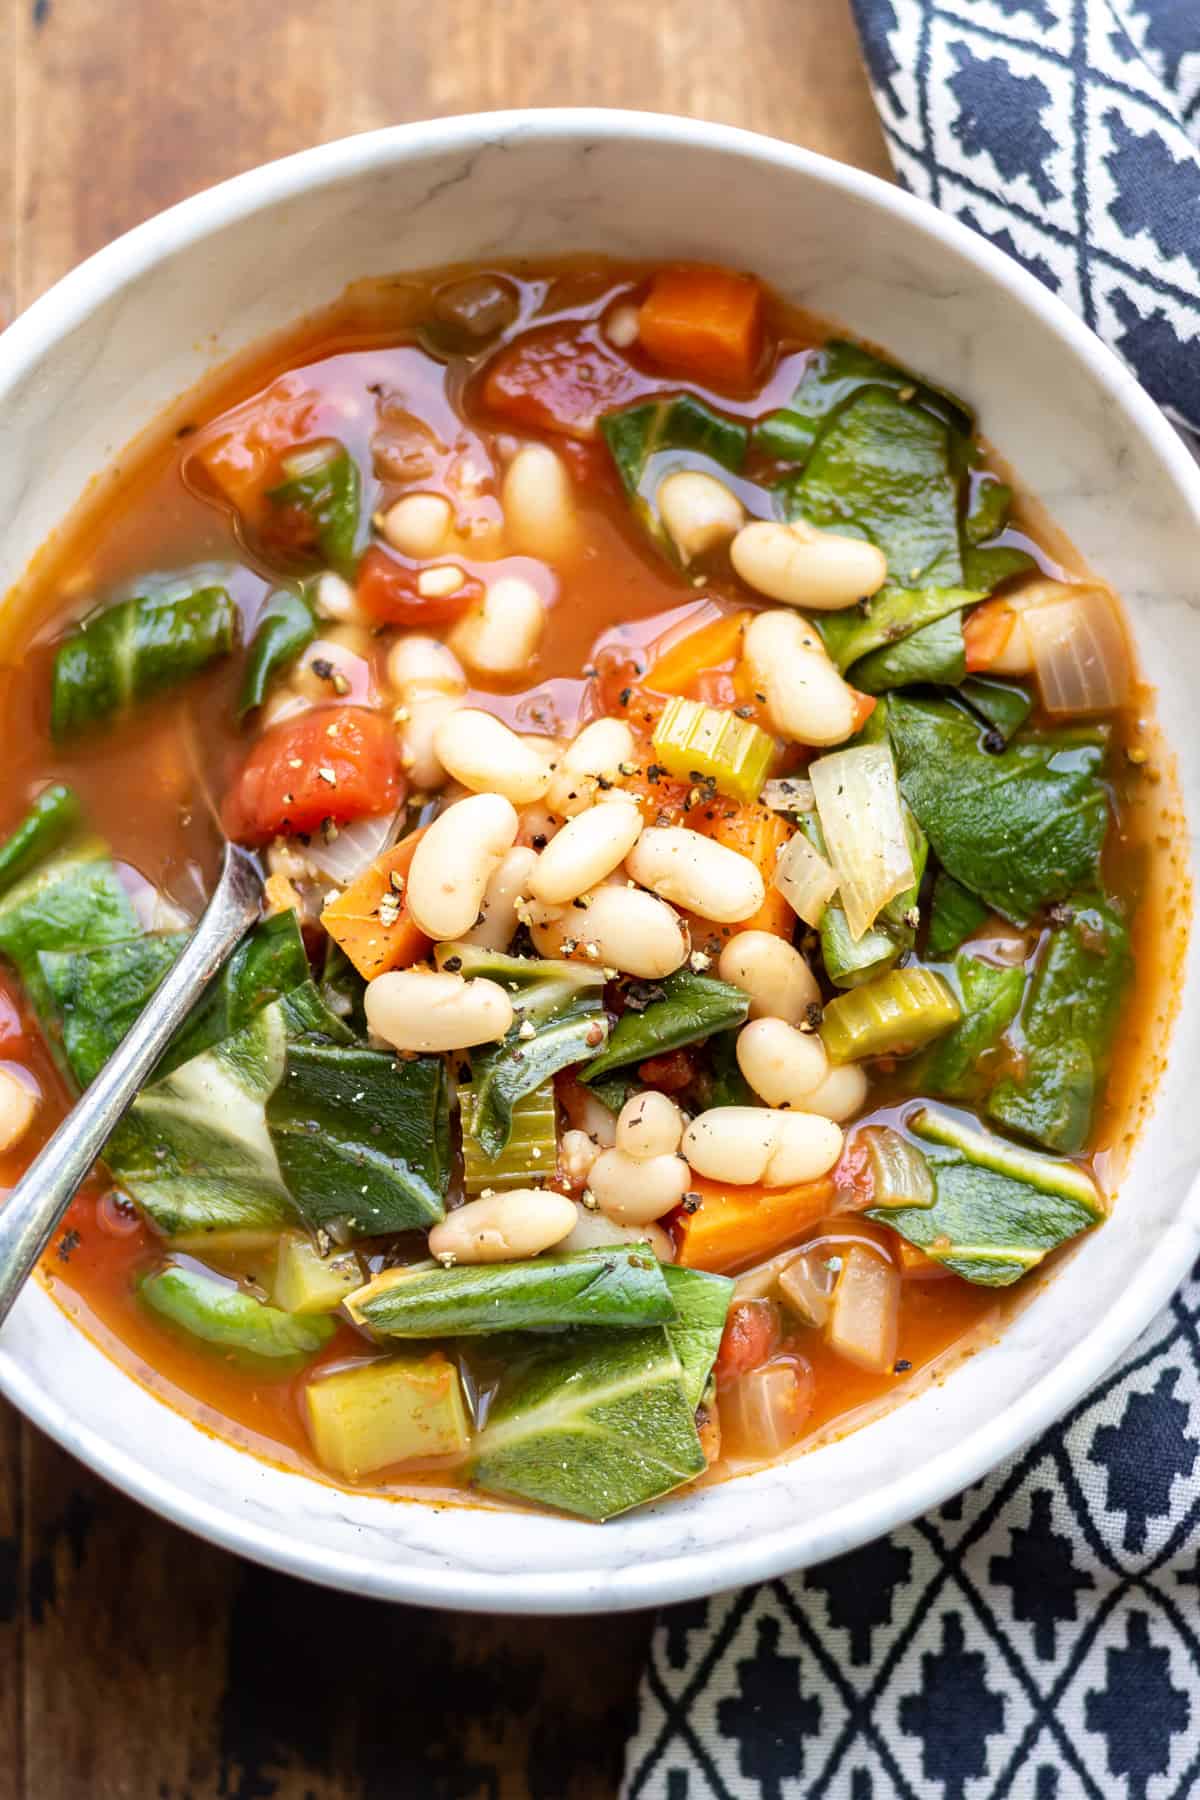 Close up of a bowl of soup with silverbeet chard, beans, vegetables and tomatoes.